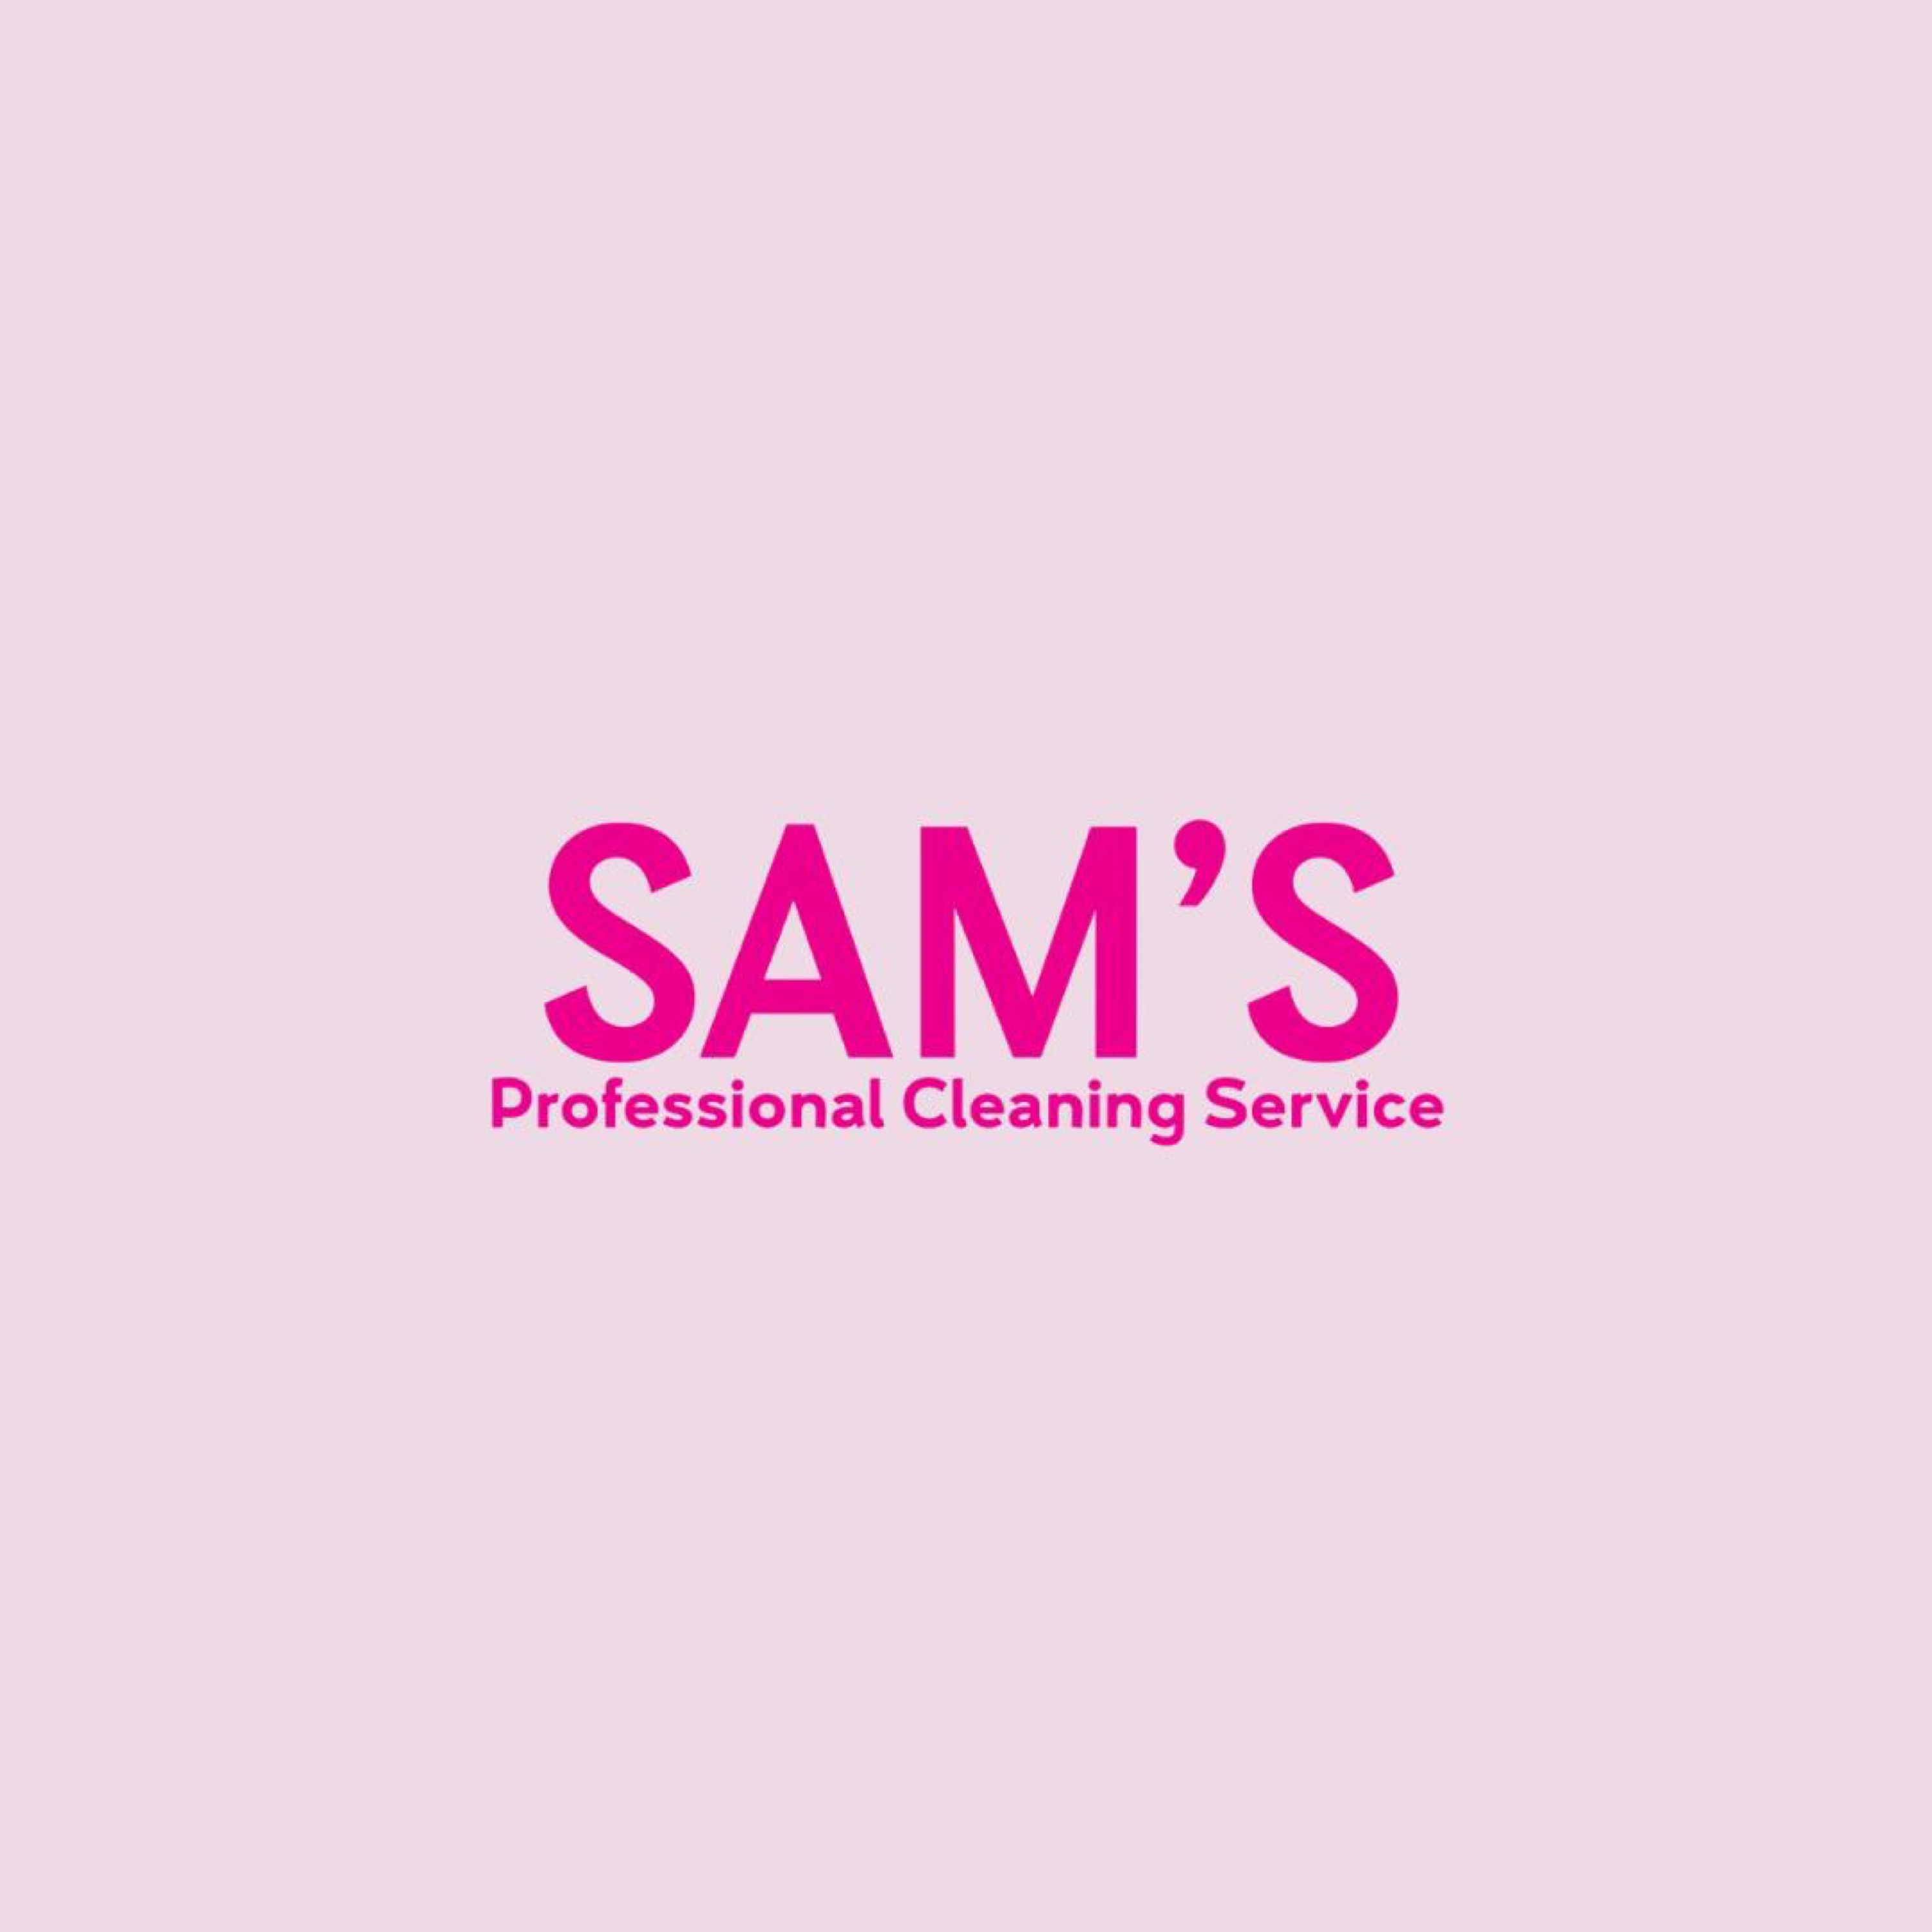 Sam's Professional Cleaning Service Logo